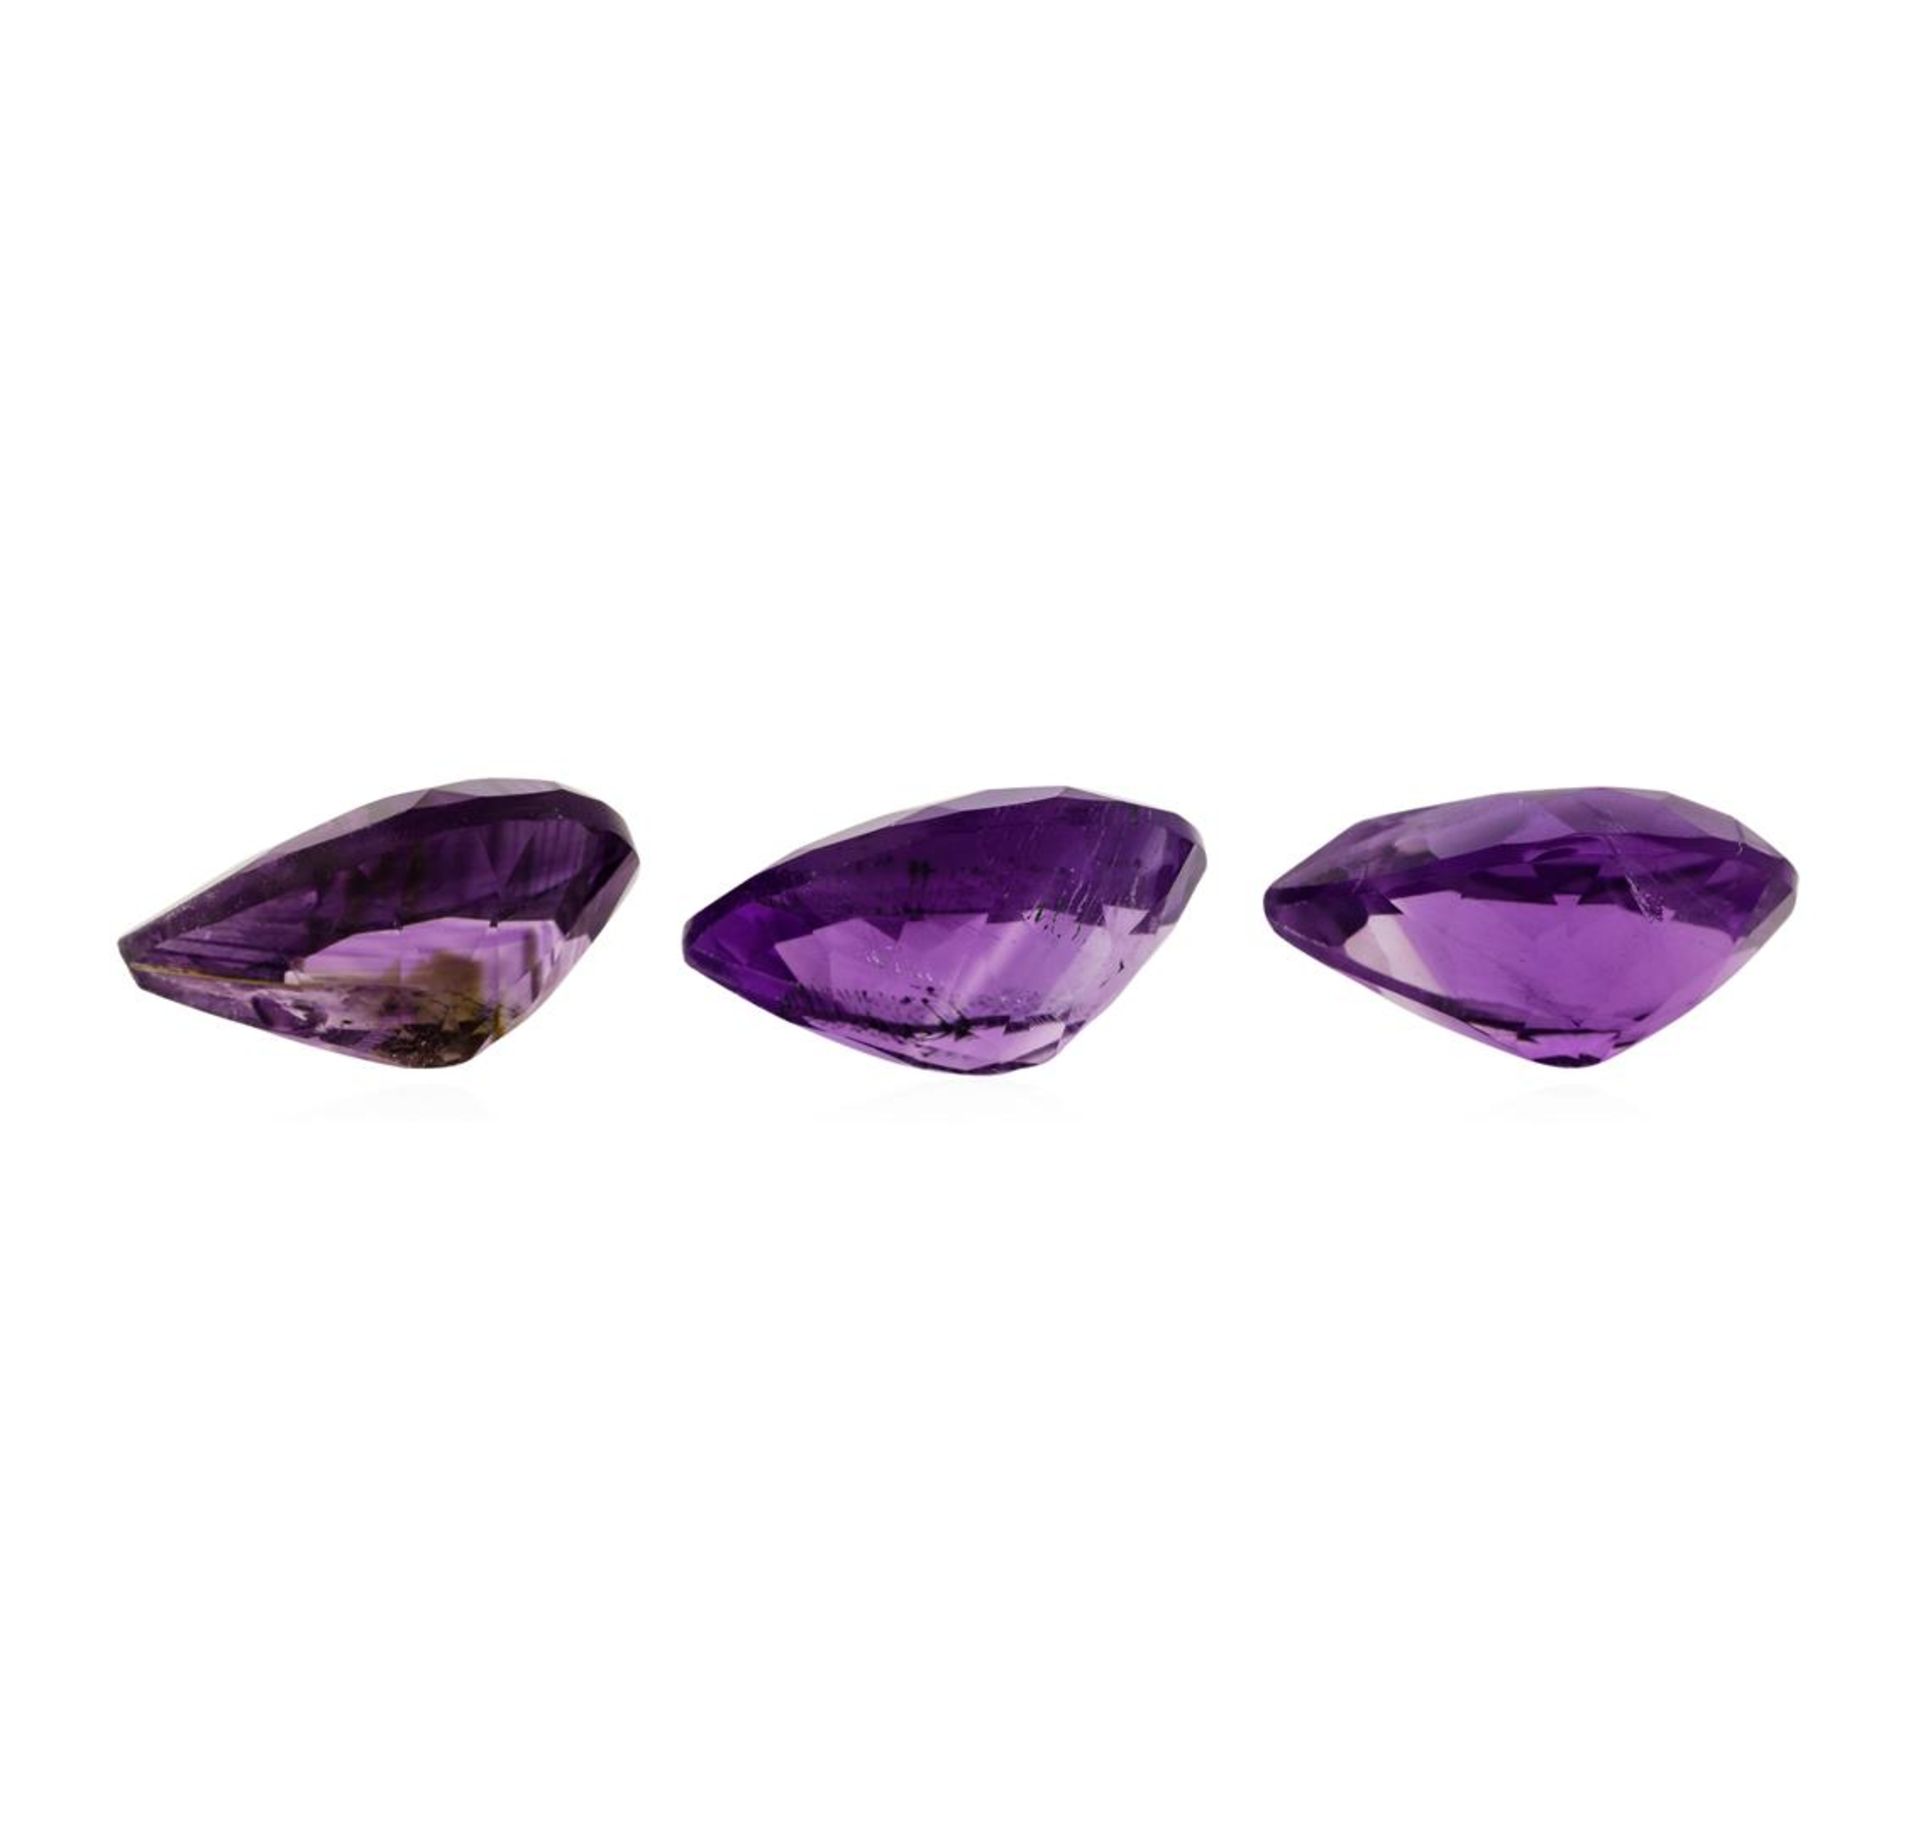 22.51ctw.Natural Pear Cut Amethyst Parcel of Three - Image 2 of 3